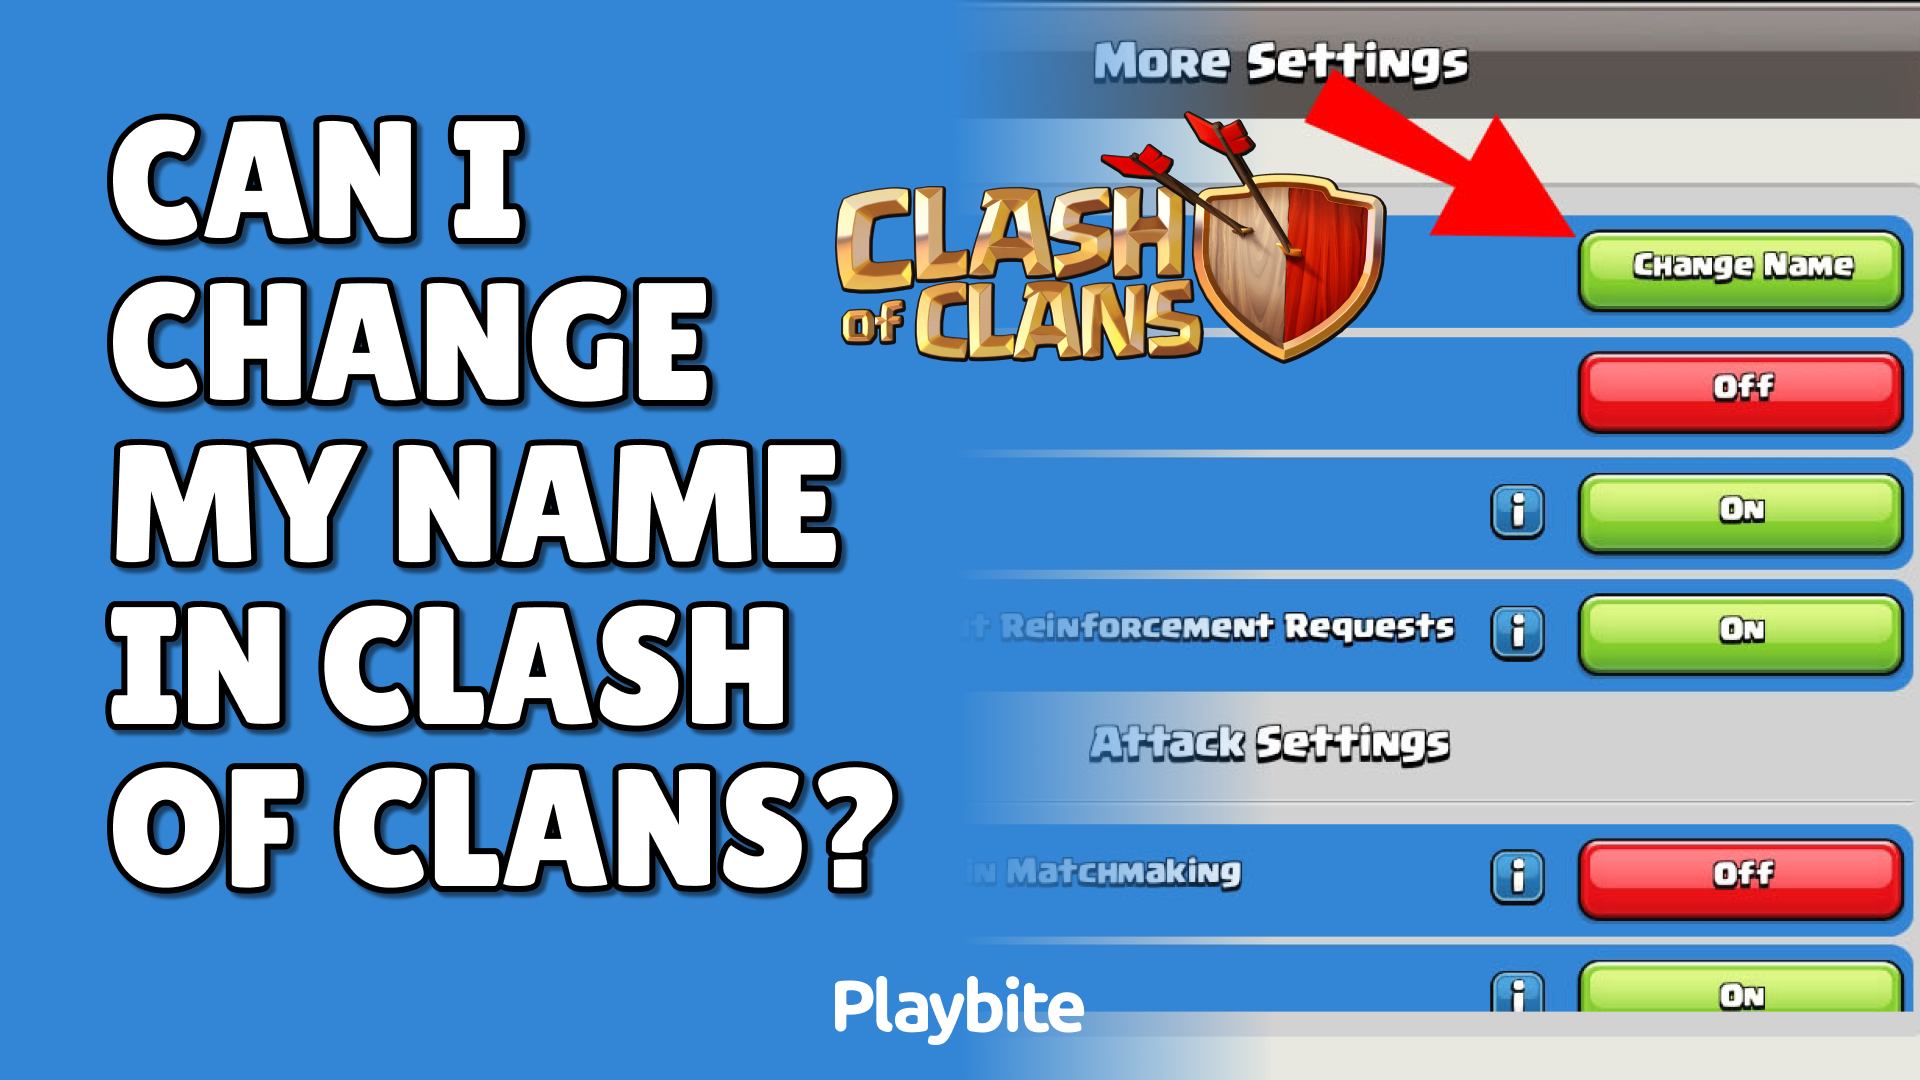 Can I Change My Name In Clash Of Clans?